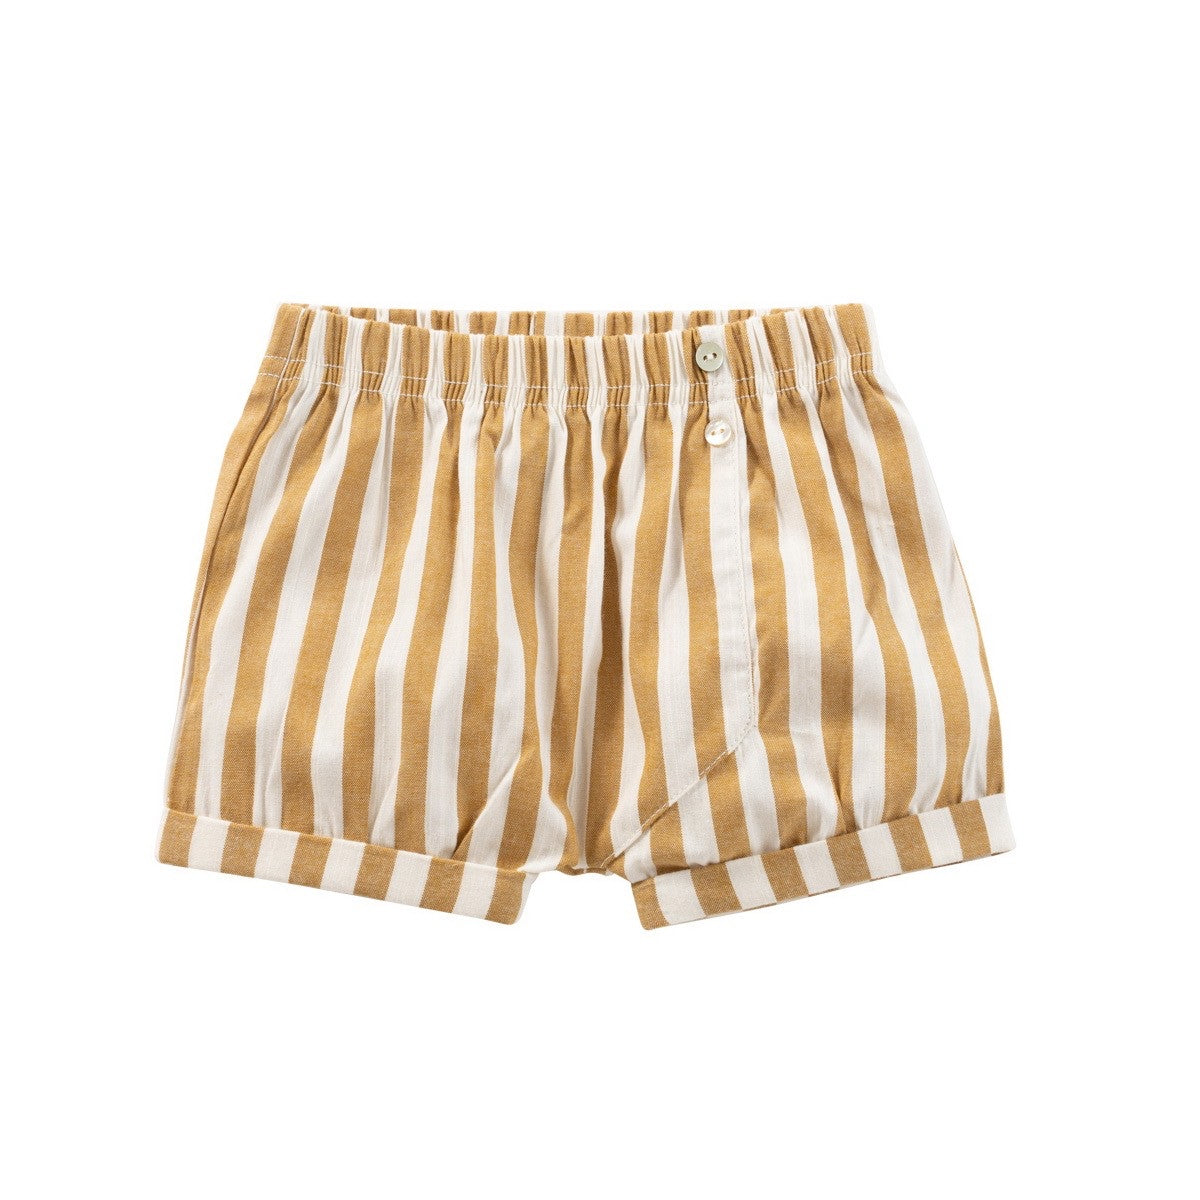 Kipp Stone and and Beige Striped Shorts